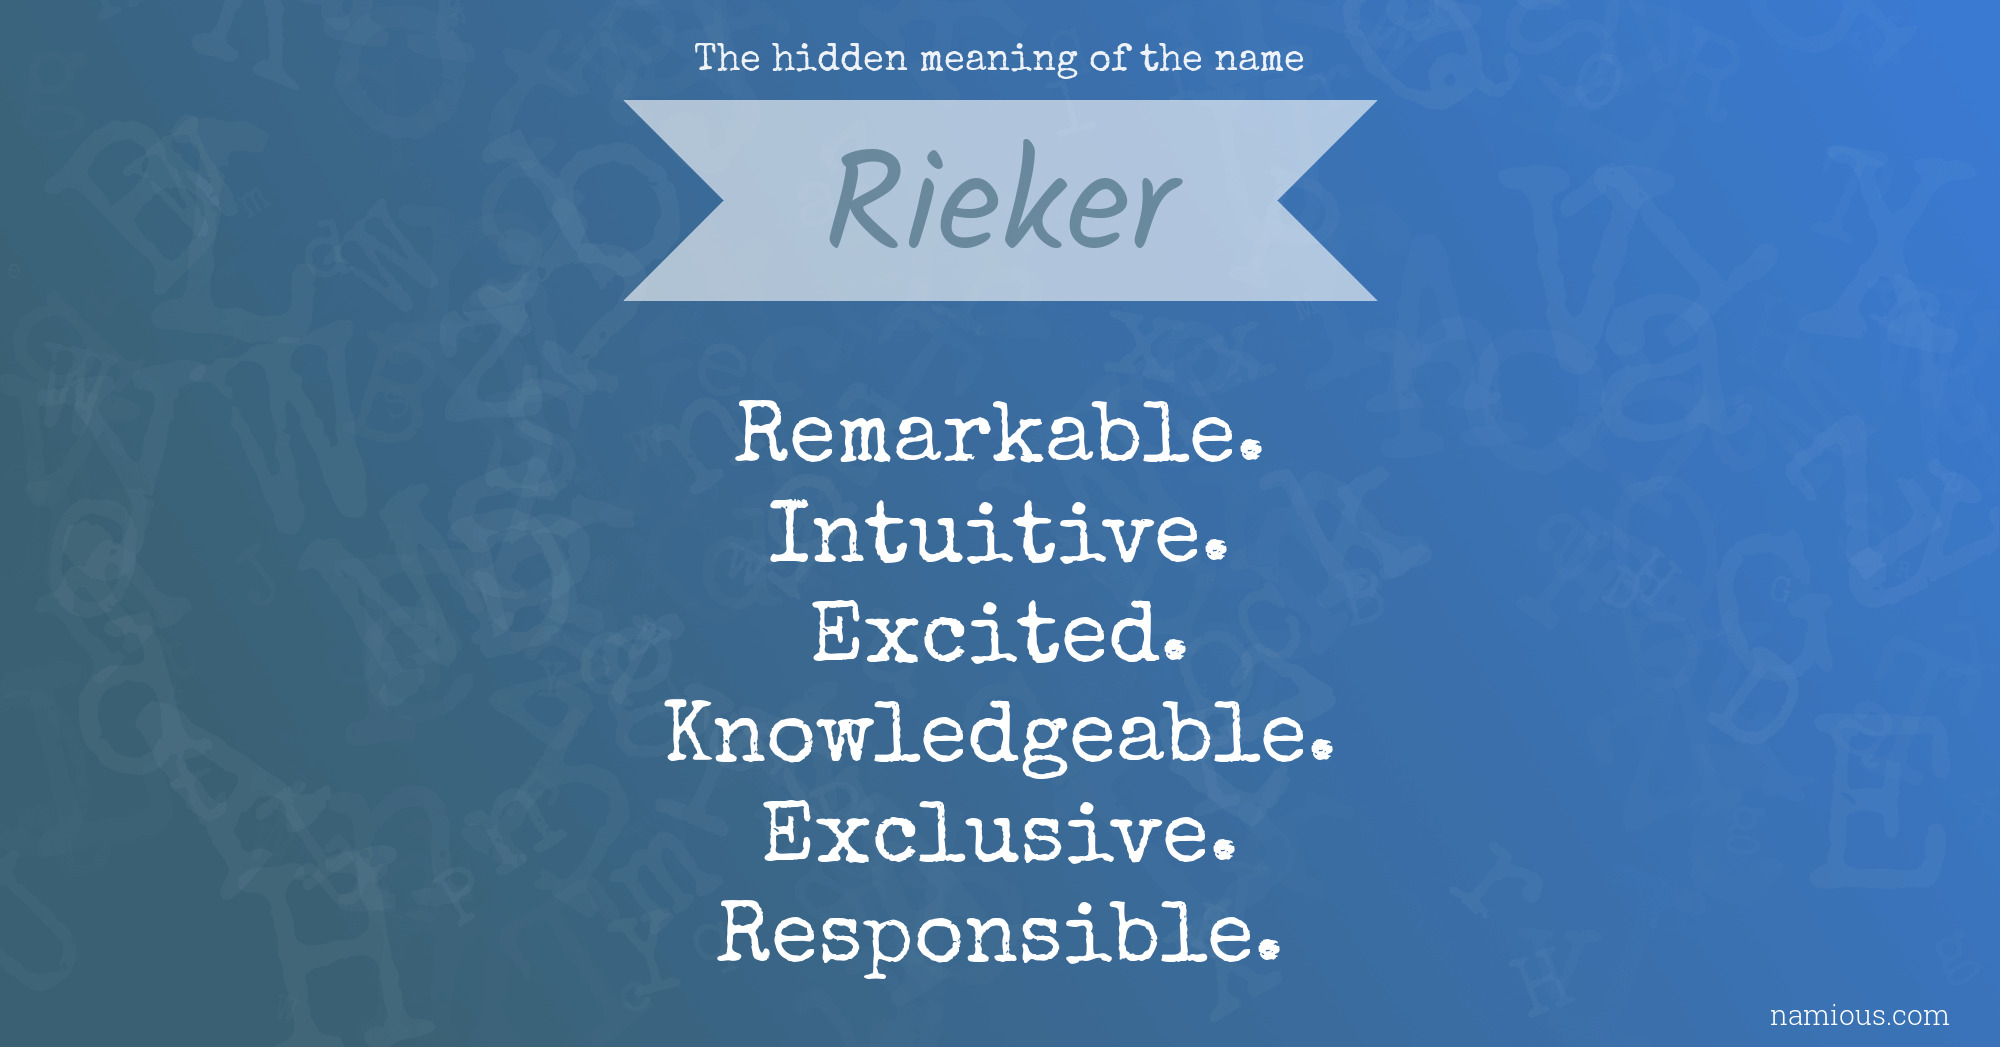 The hidden meaning of the name Rieker